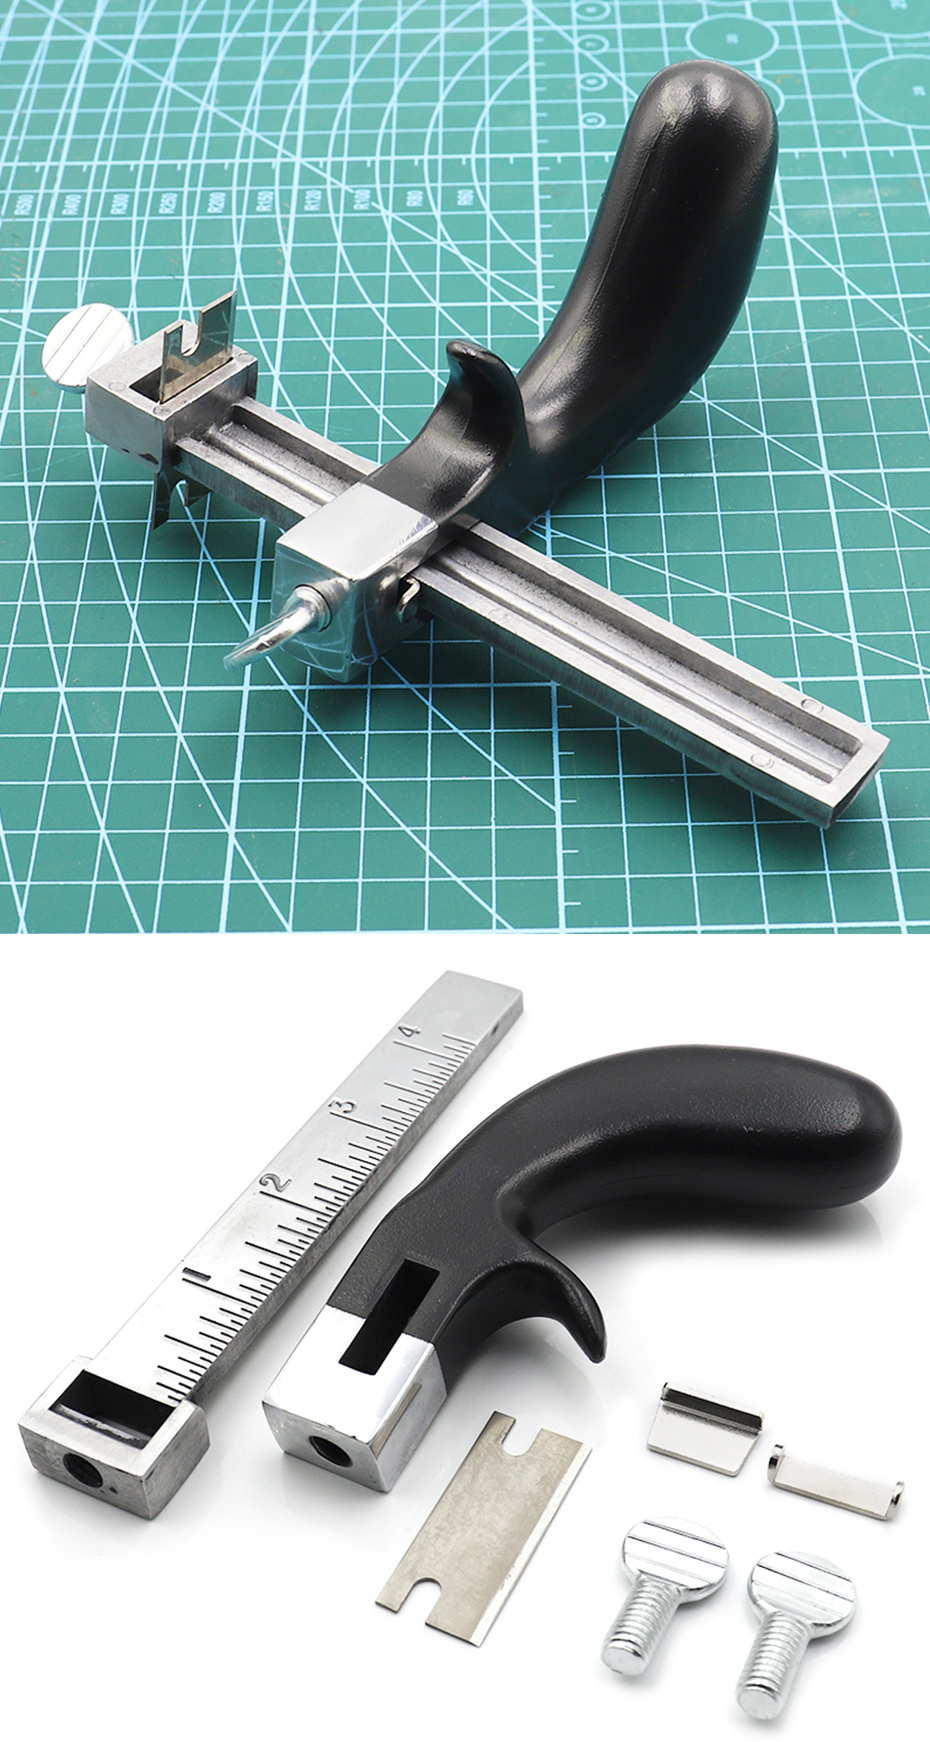 QJH Adjustable Leather Strap Cutter 60mm Aluminium Alloy Leather